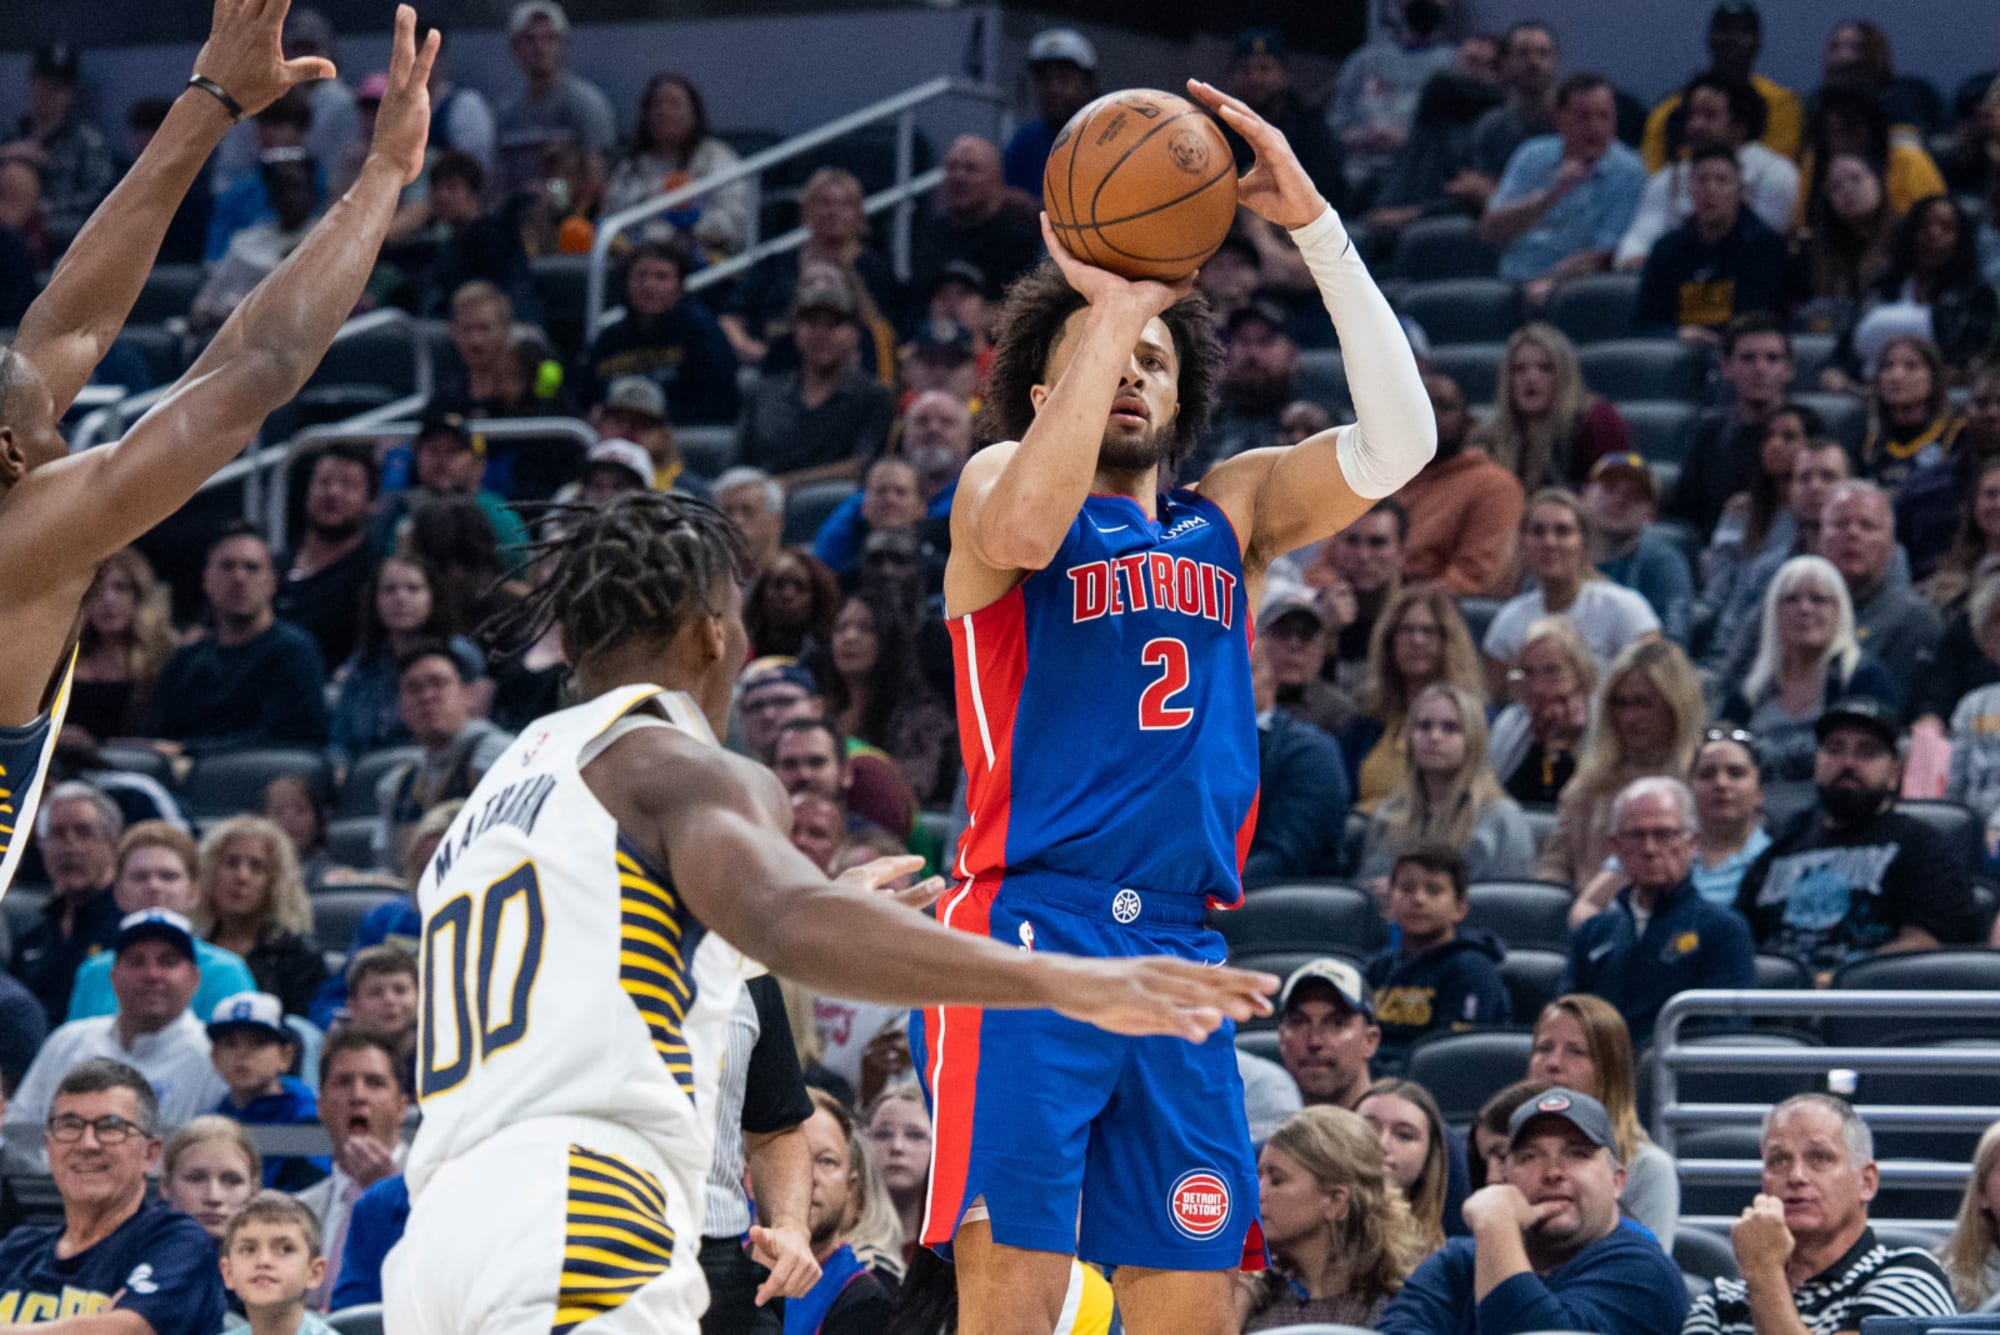 Cade Cunningham's big night doesn't ease 136-112 loss for Detroit Pistons